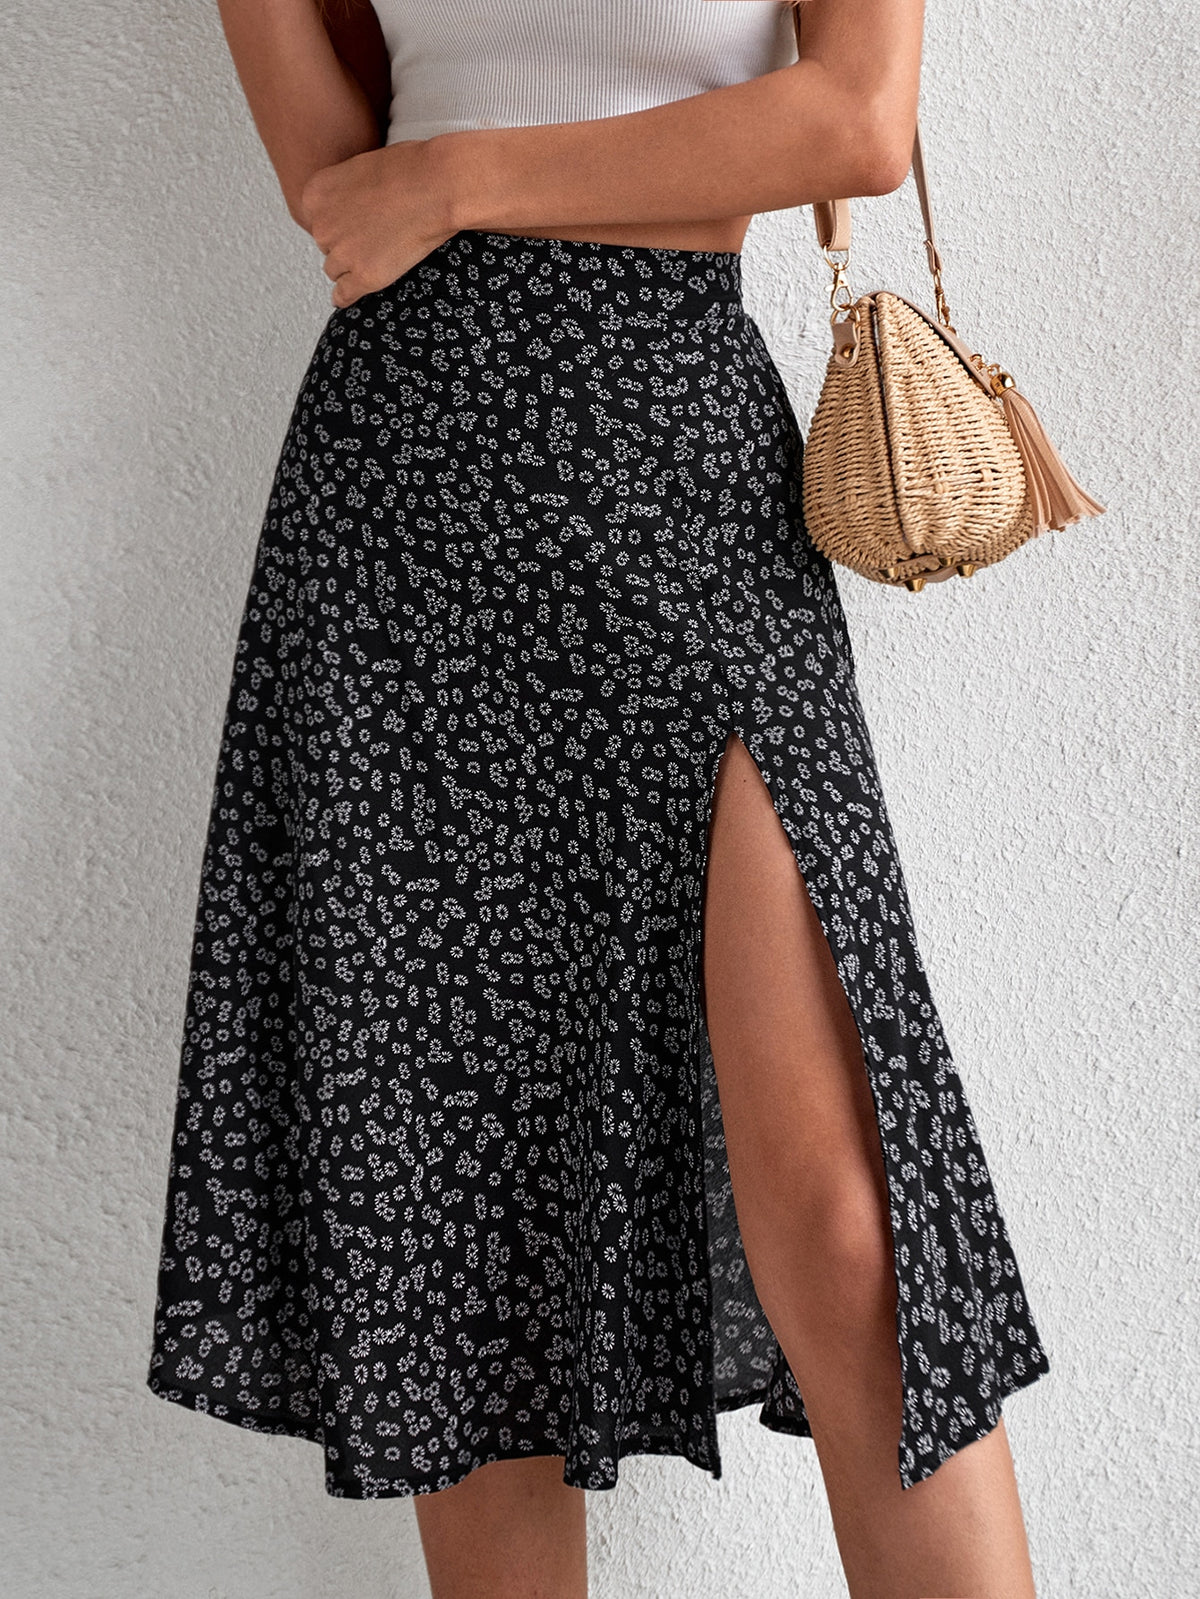 Floral Print Skirt with Split Thigh